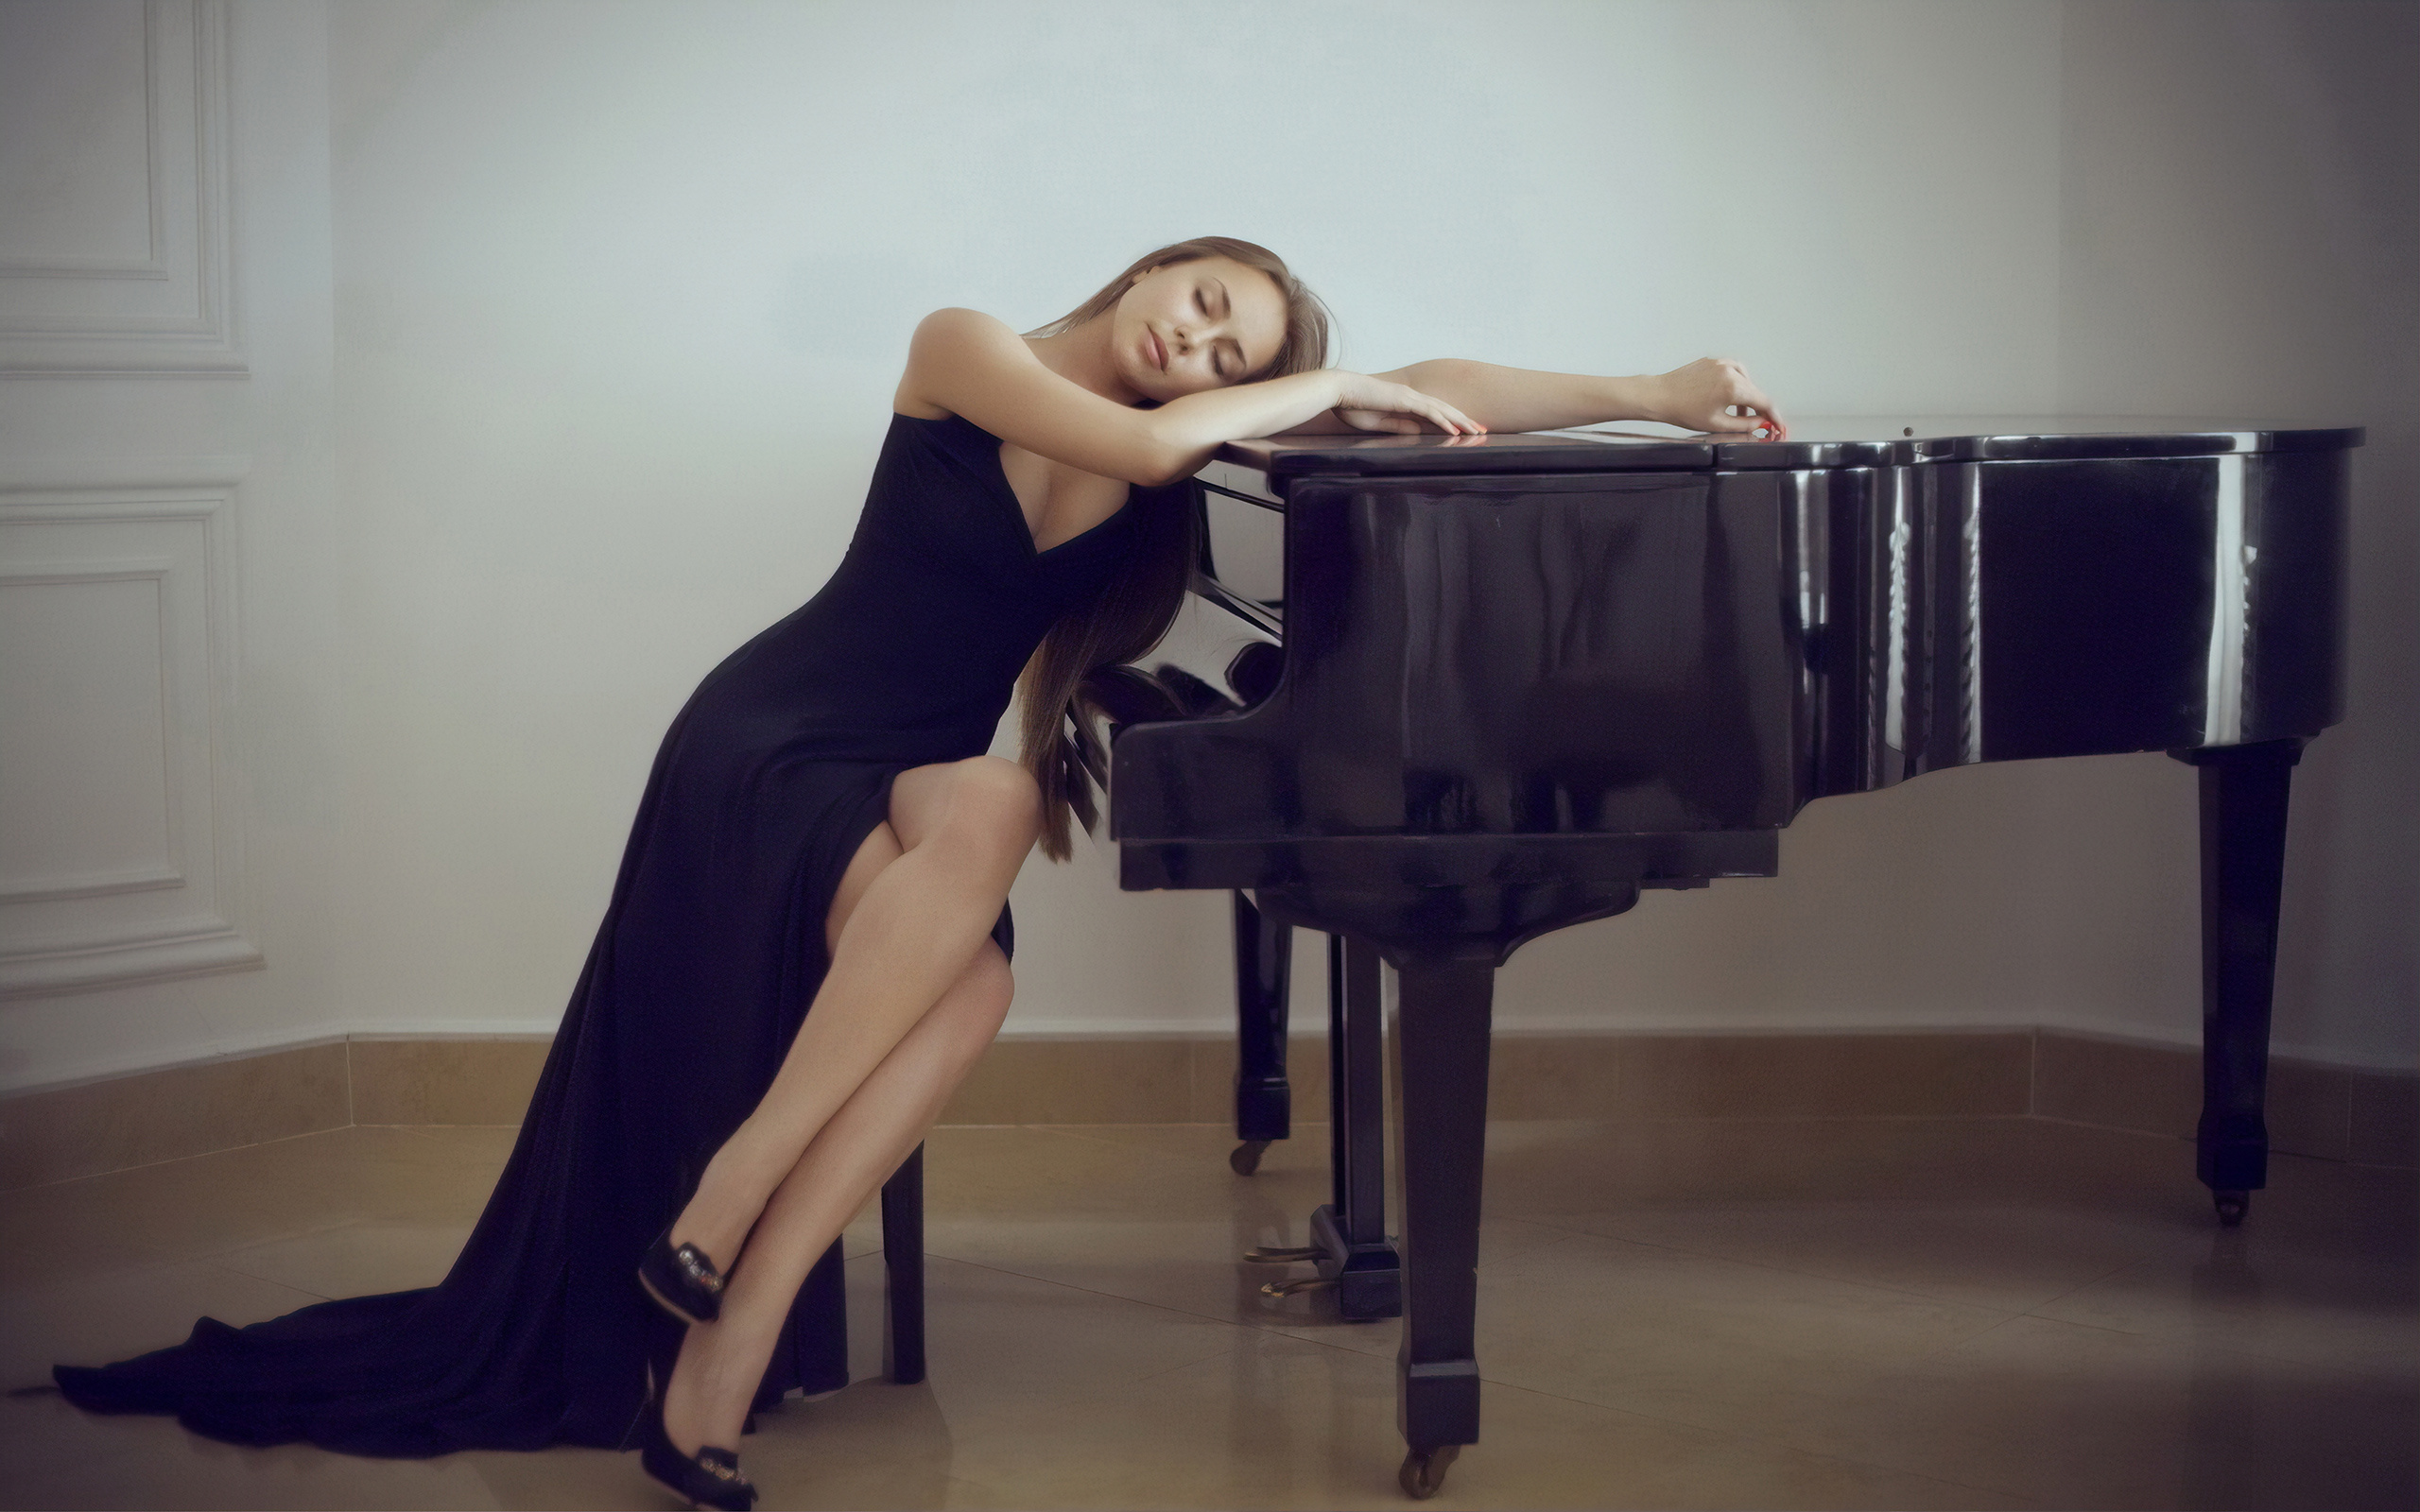 Grand Piano: Girl In Black Dress Leaning Over Keyboard Instrument, Musician, Musical instrument. 2560x1600 HD Background.